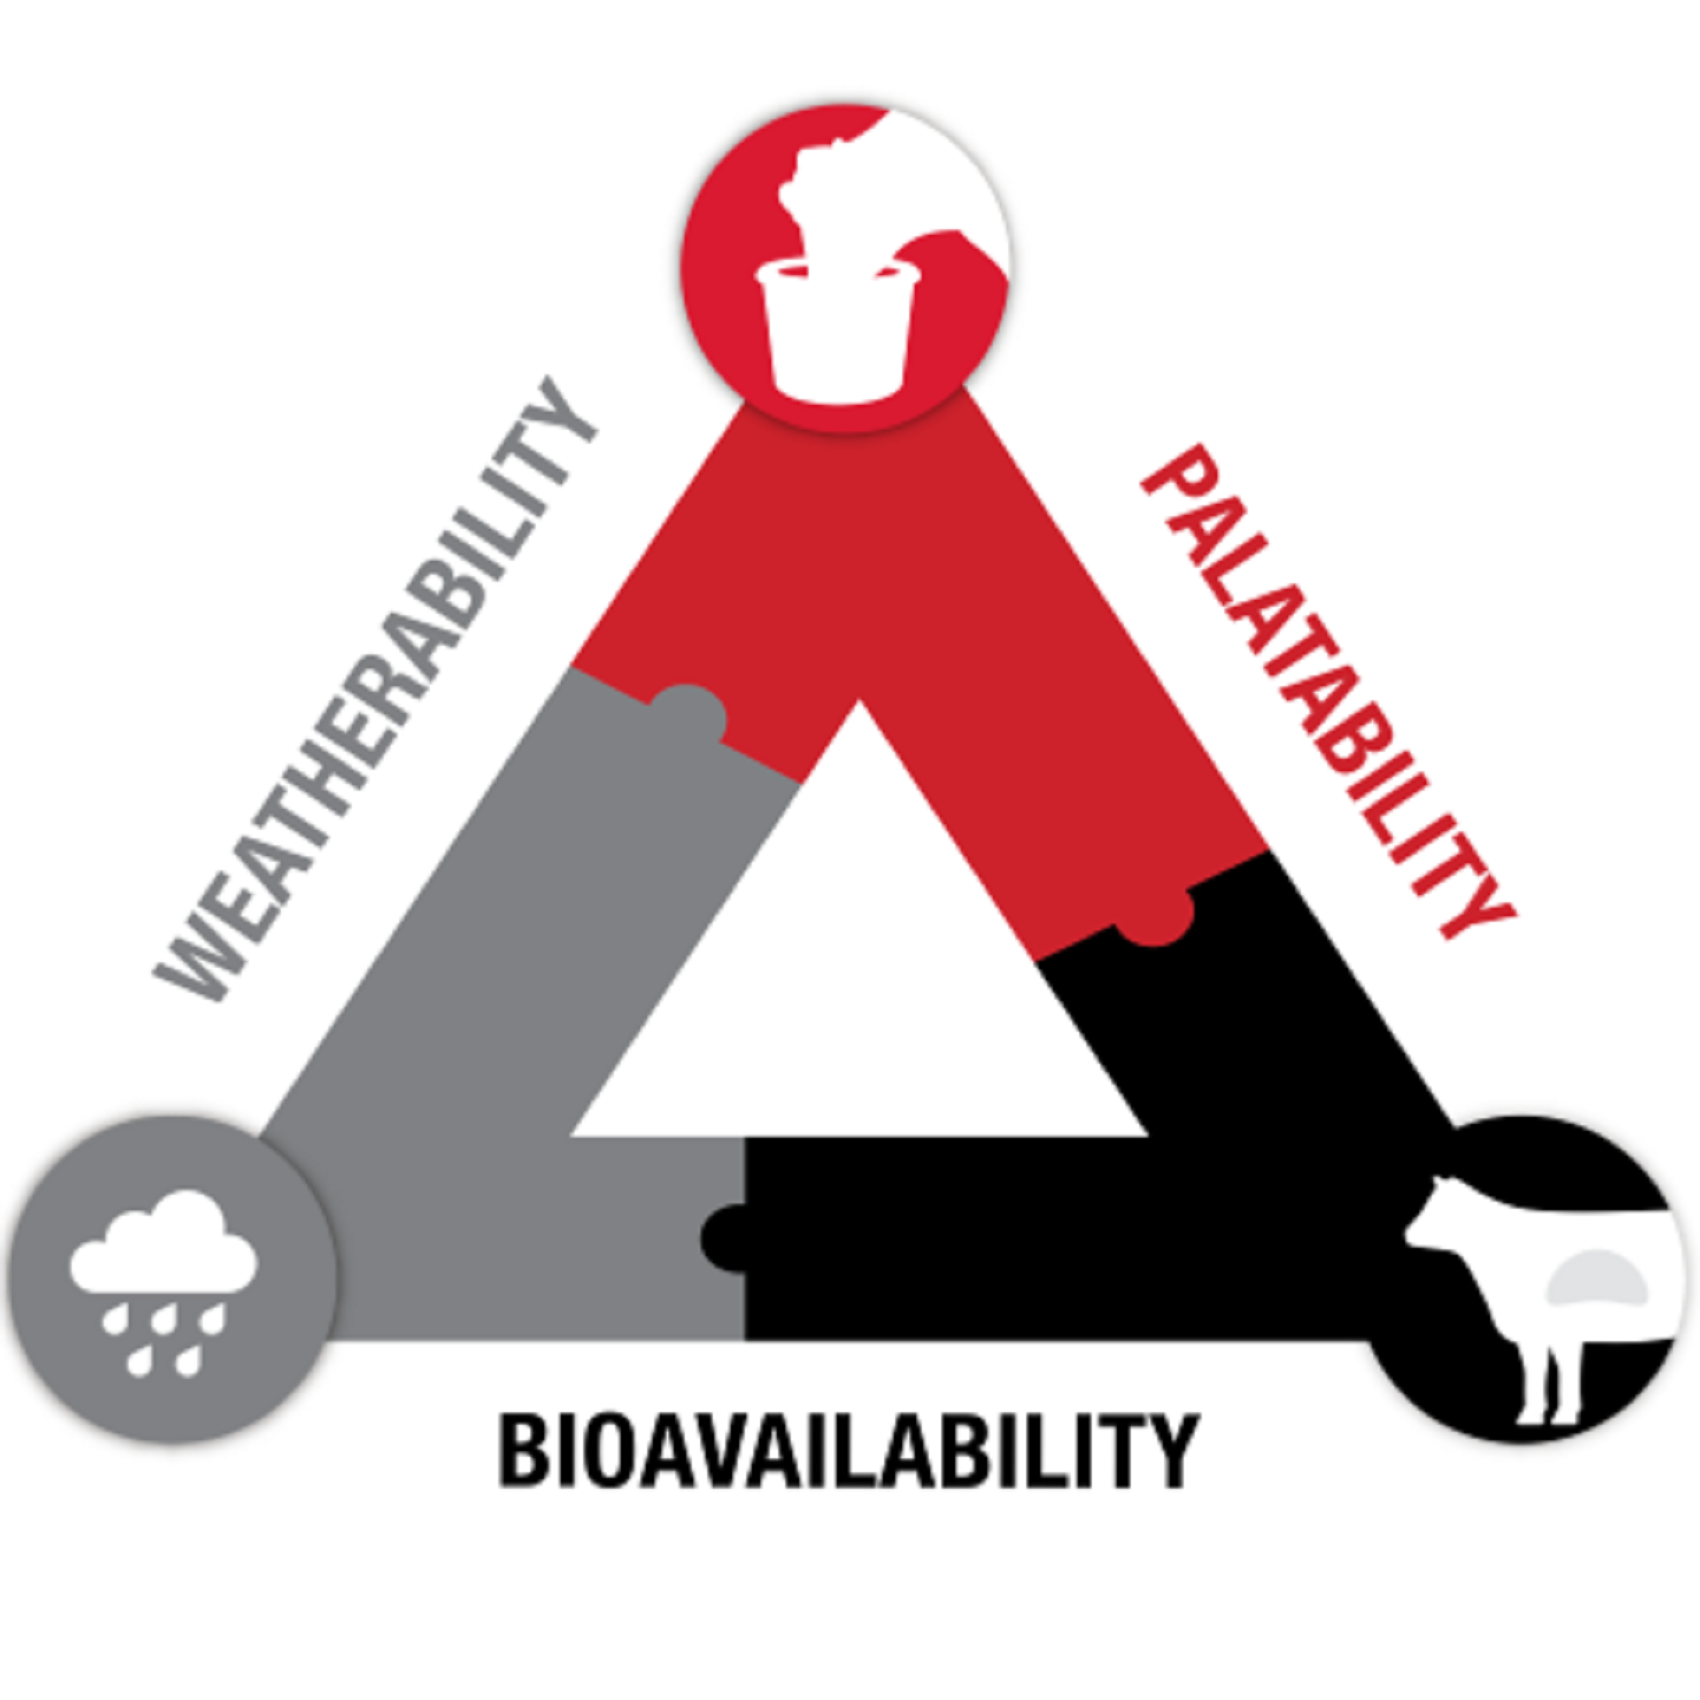 Graphic showing bioavailability, palatability and weatherability, the three keys of any quality mineral program.